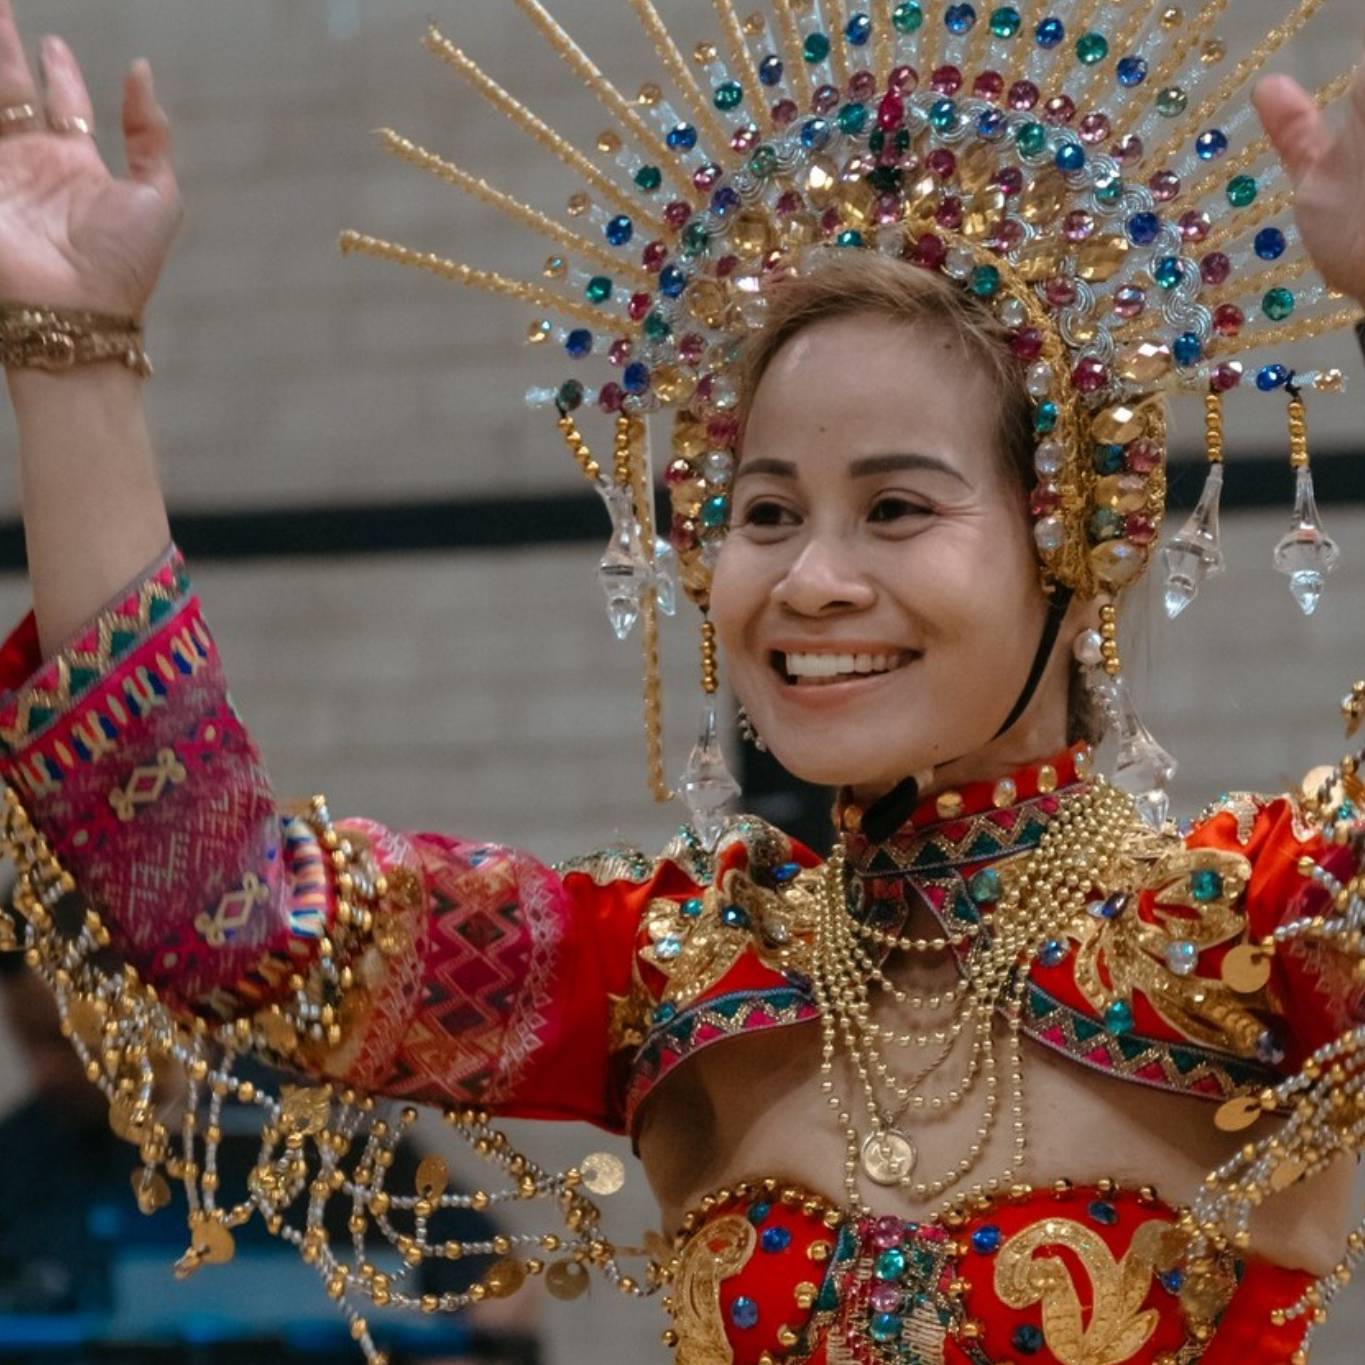 Creative Hearts United. Mrs Jocelyn Villar Hayes performed the “Pag-Apir”, a traditional dance of the Maranao people on the island of Mindanao, Philippines.